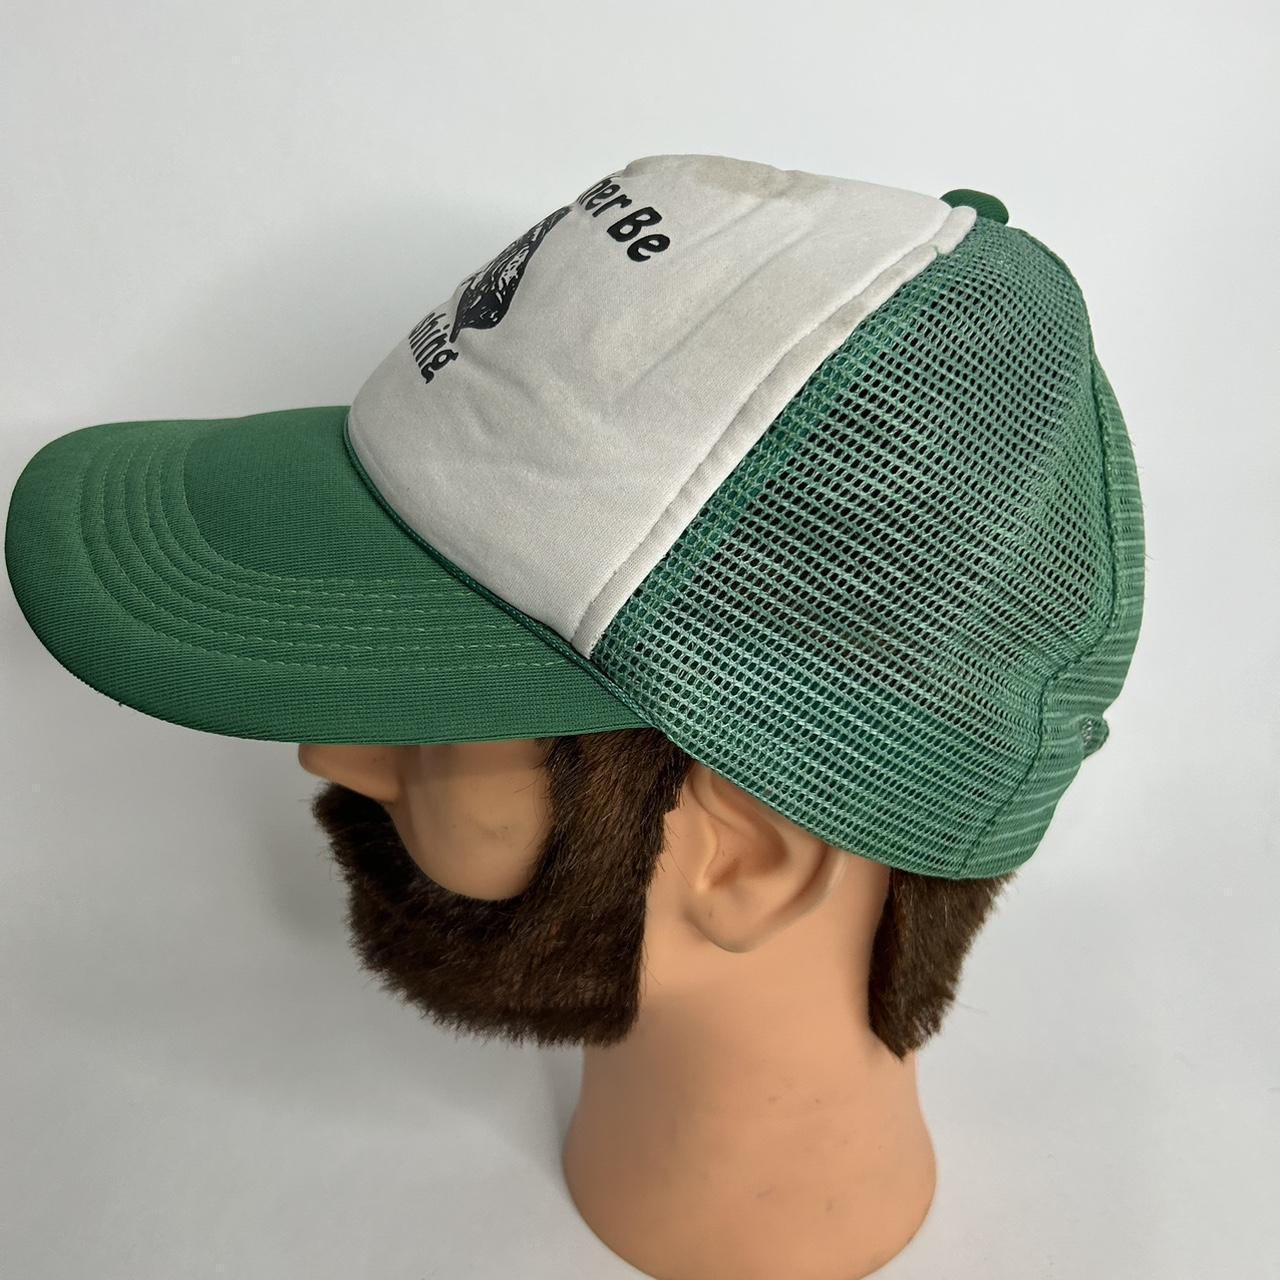 I’d rather be fishing trucker hat funny y2k. One